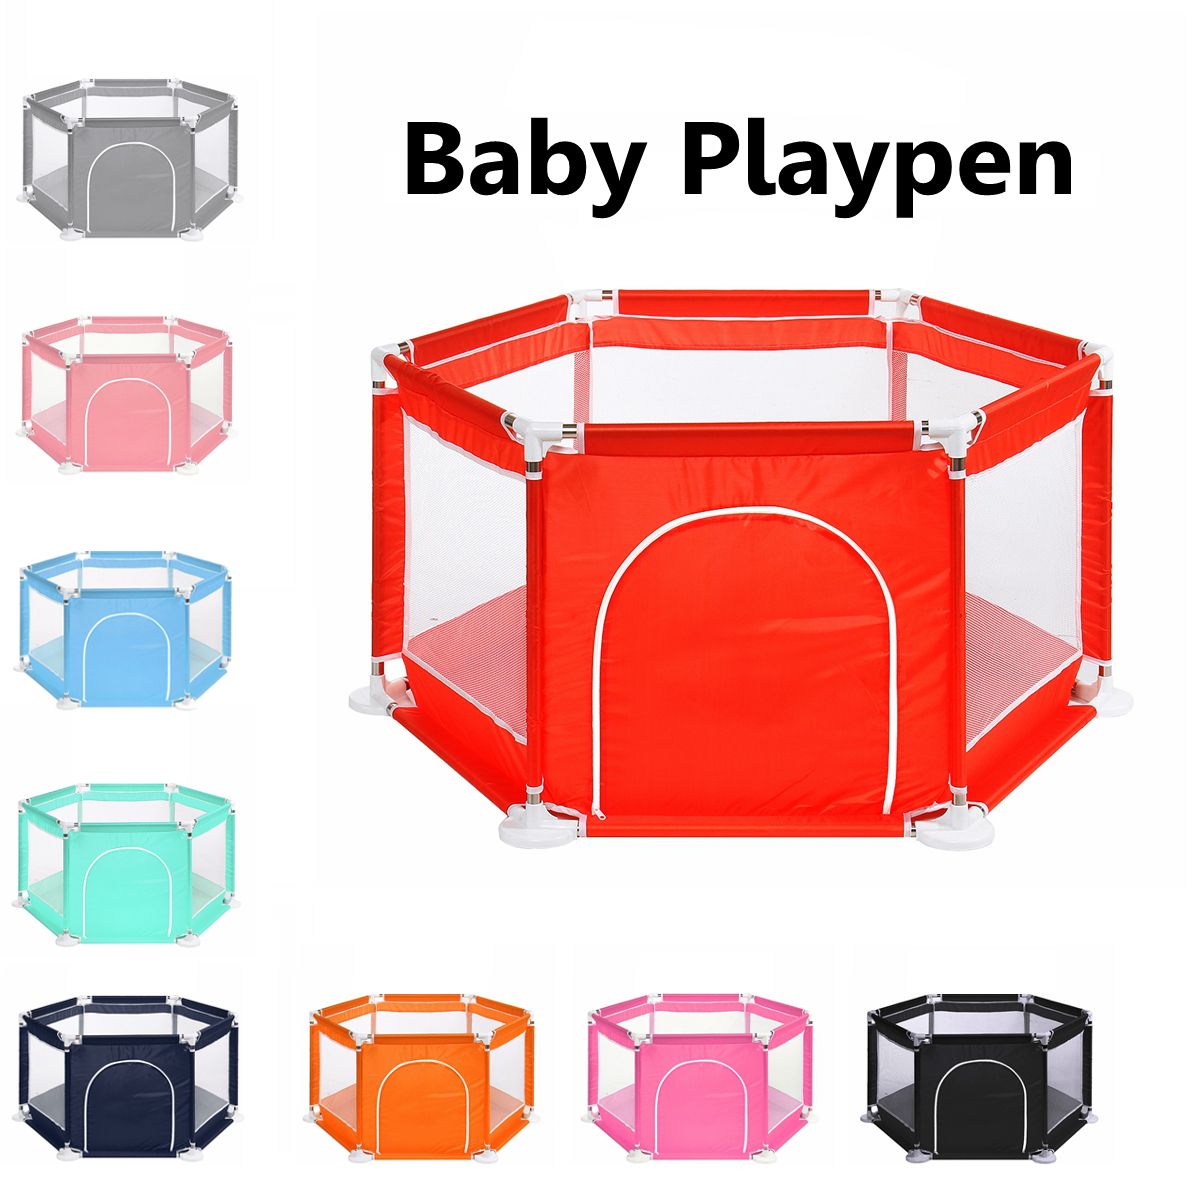 6-Sided-Baby-Playpen-Playing-house-Interactive-Kids-Toddler-Room-With-Safety-Gate-Decorations-1610792